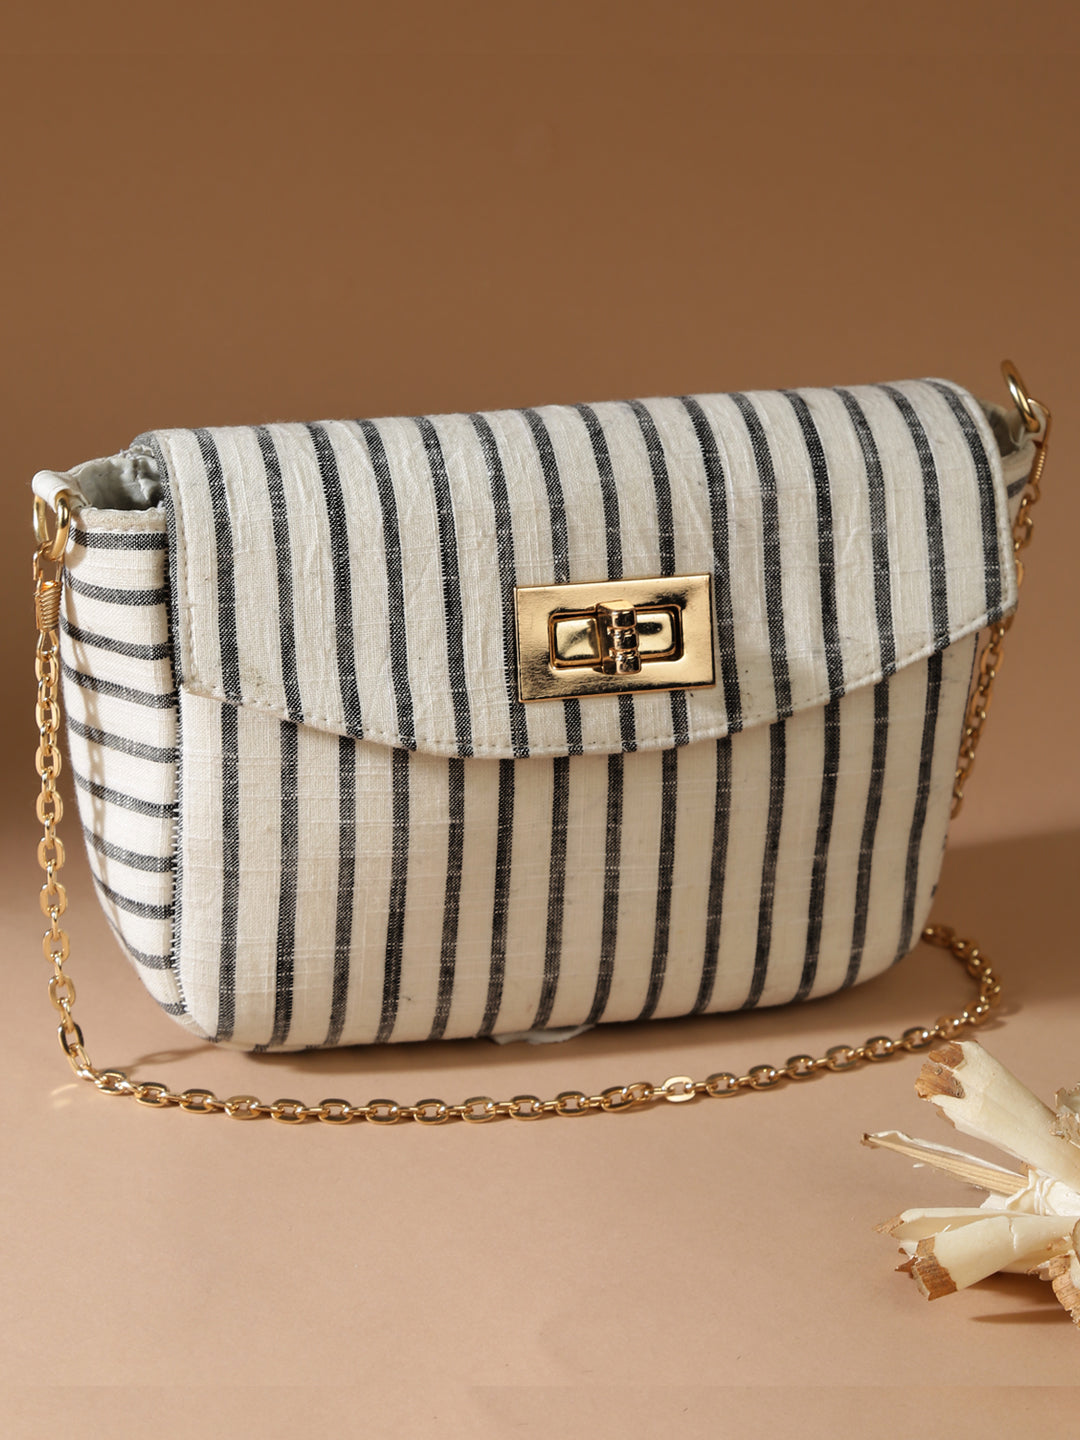 Vertical Stripes Printed Sling Bag With Detachable Chain